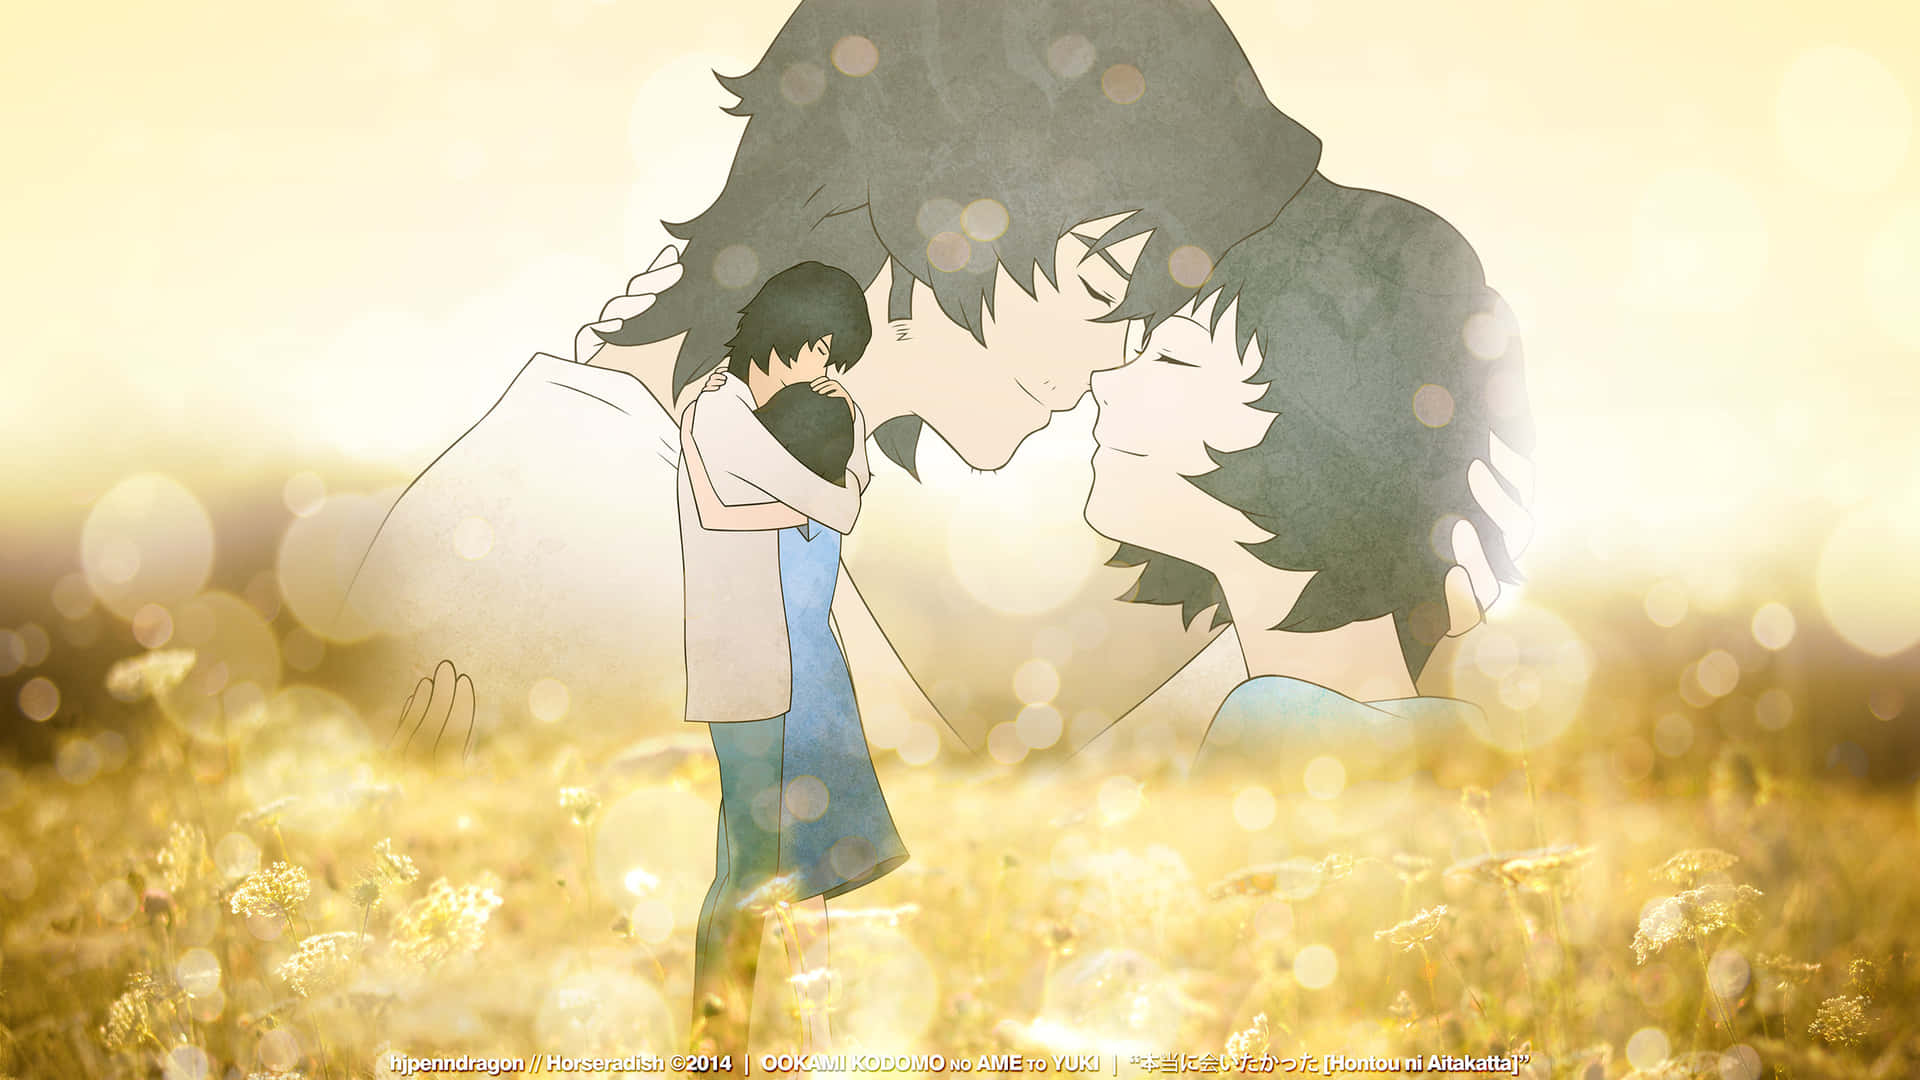 Wolf Children living together in harmony Wallpaper